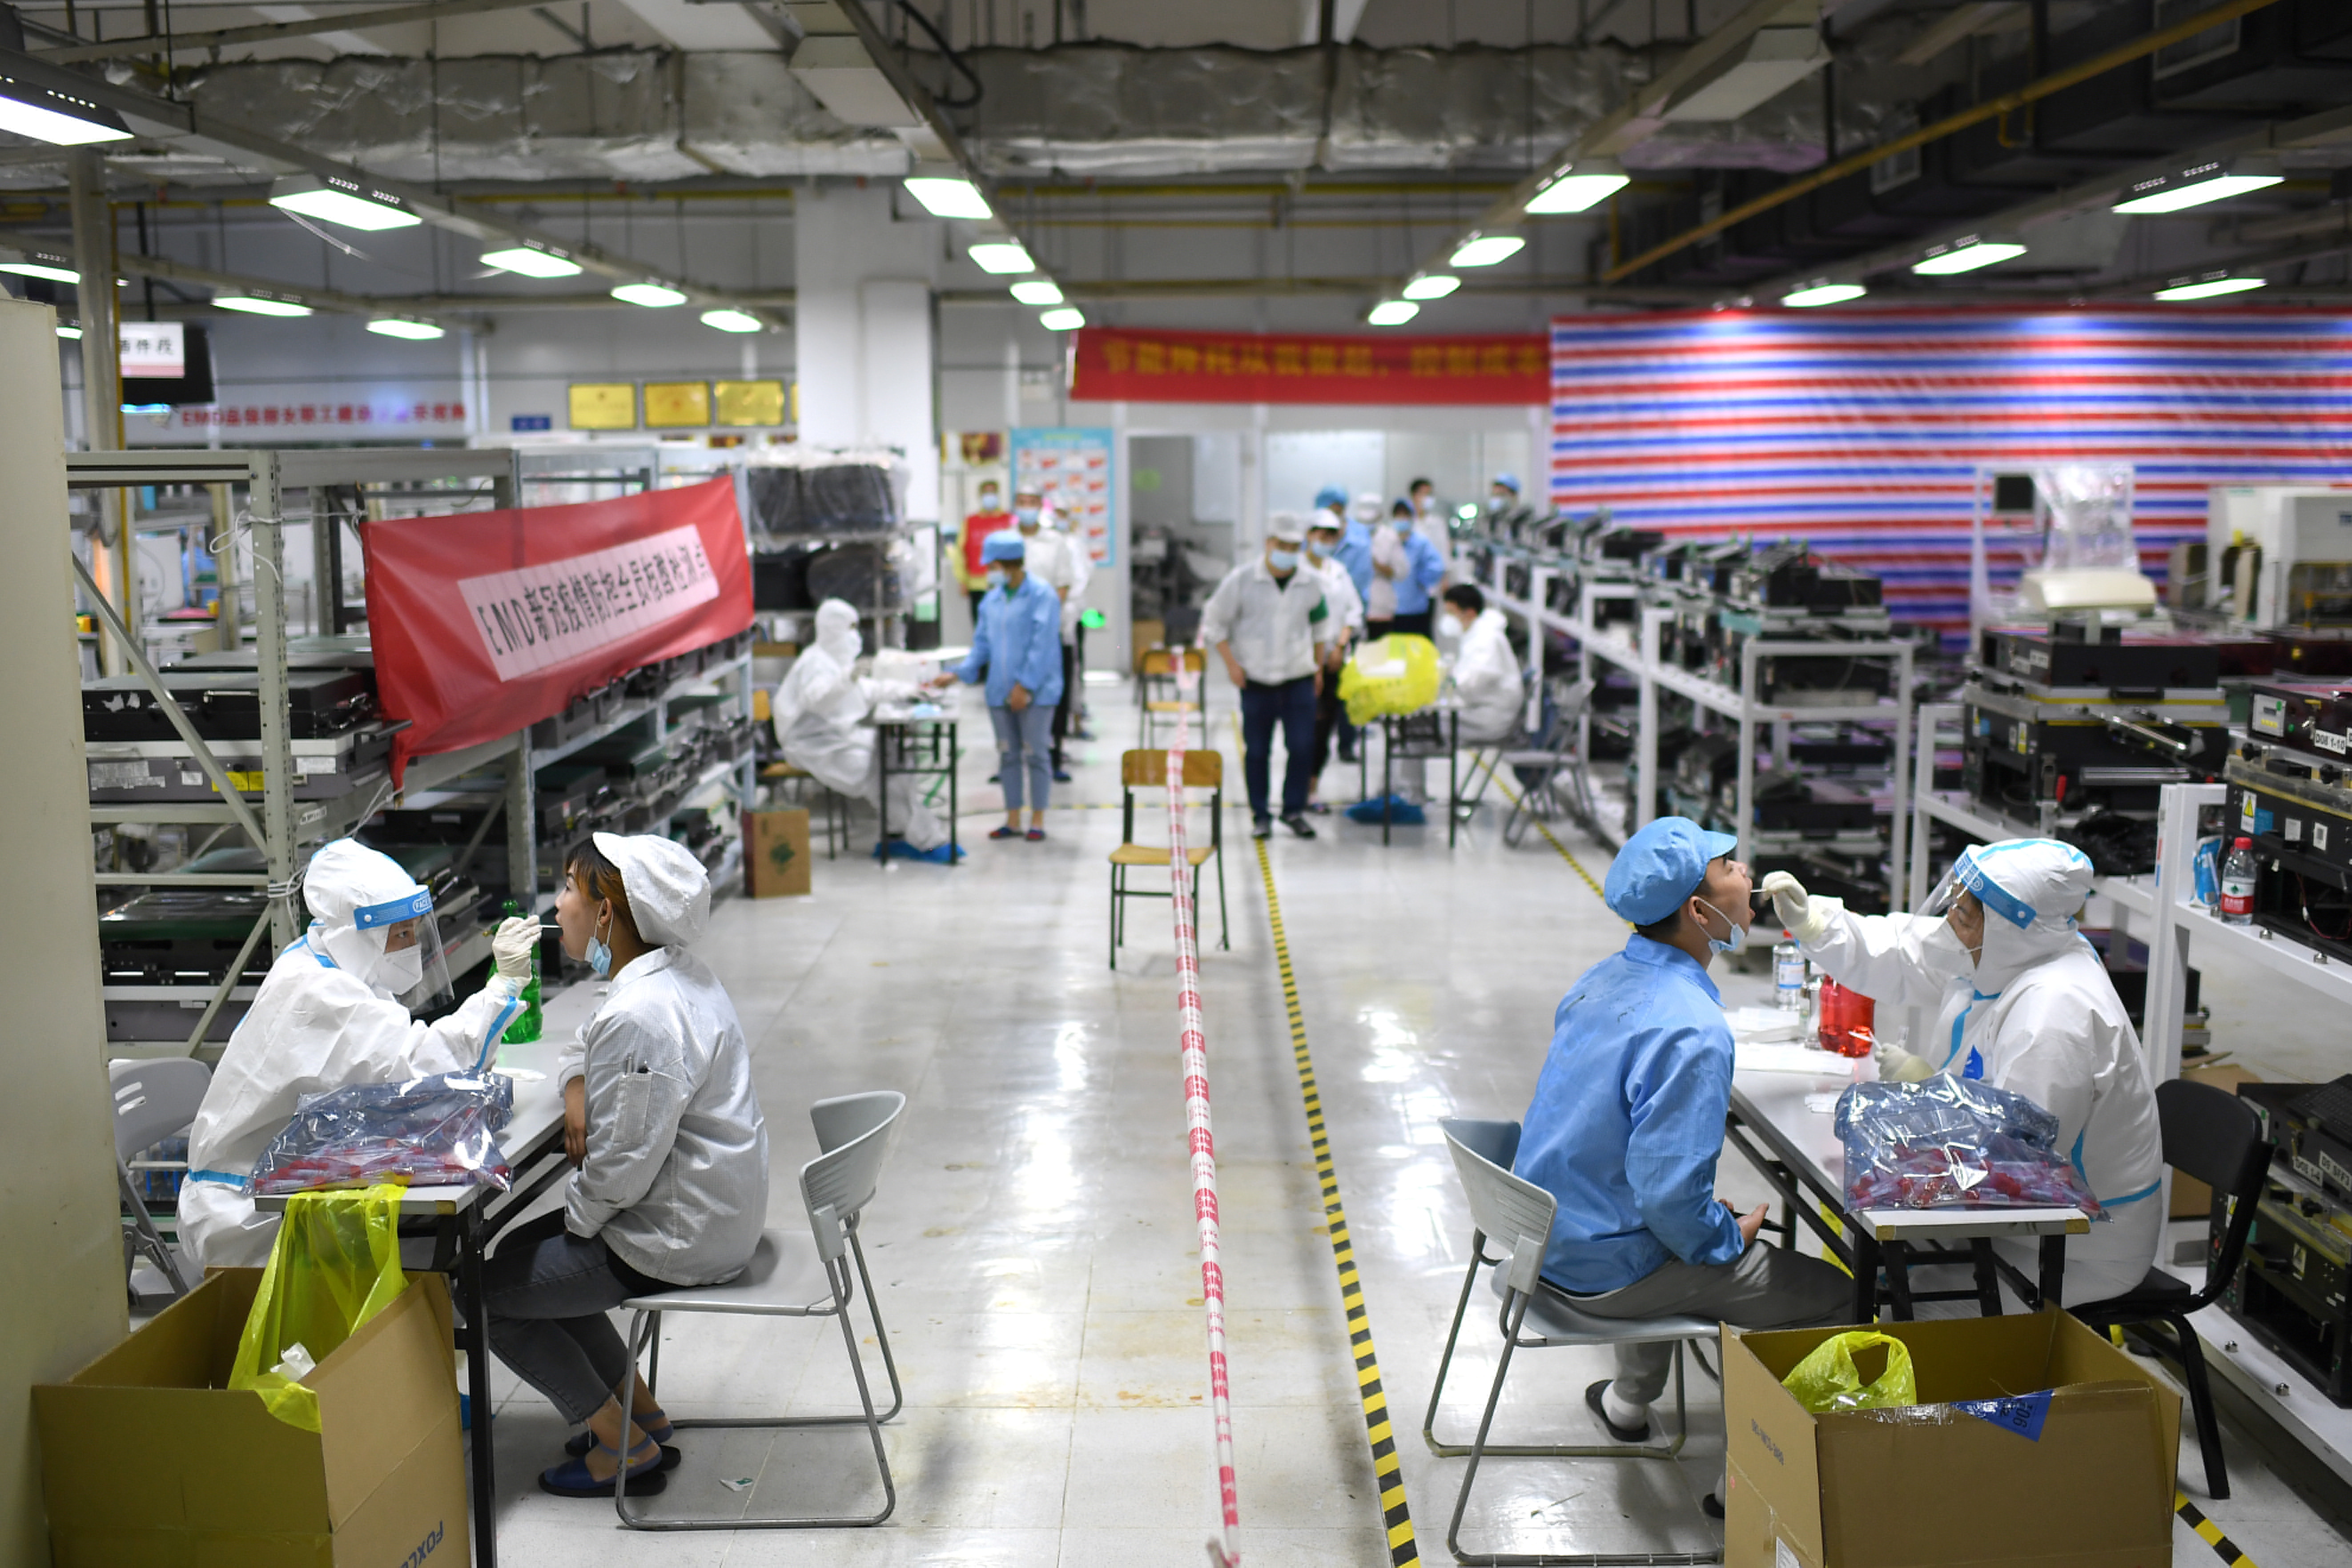 Medical workers collect swabs from workers for nucleic acid testing at a Foxconn factory, following new COVID-19 cases in Wuhan